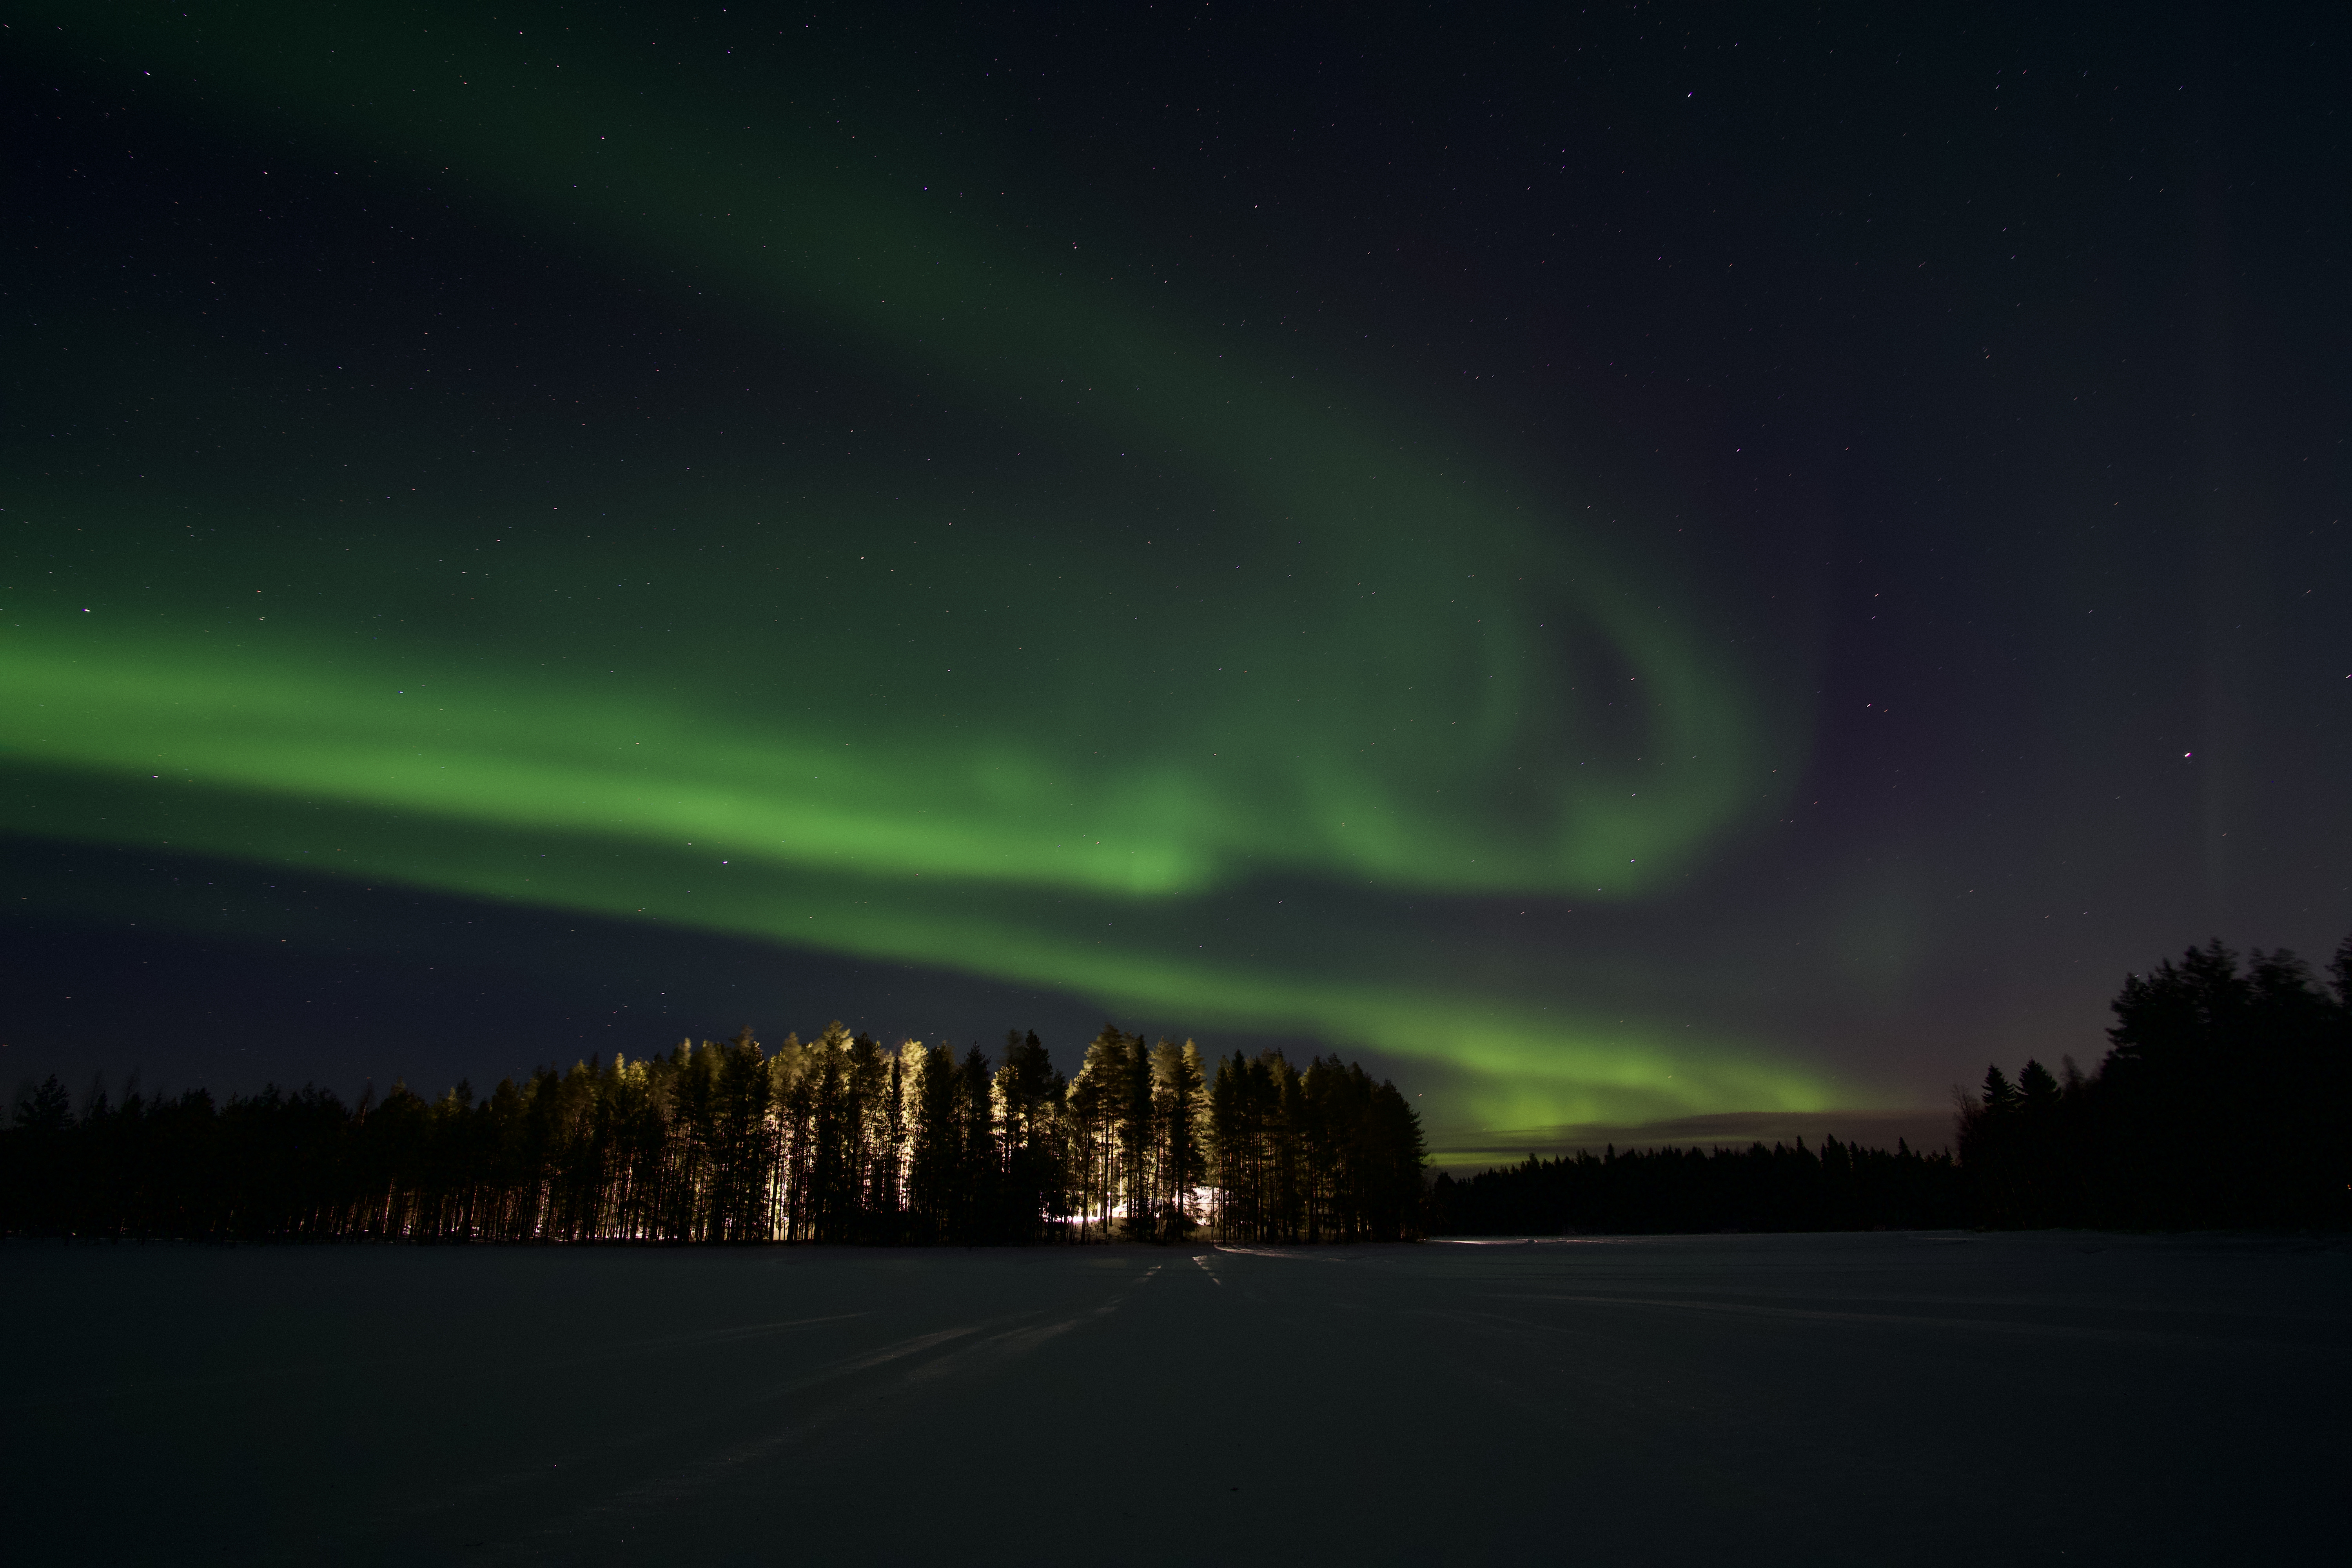 Aurora borealis in northern Lapland, Finland. Seeing the northern lights was one of the most unique and magical experiences of studying abroad in Finland, if I didn't take this photo I wouldn't be sure it really happened